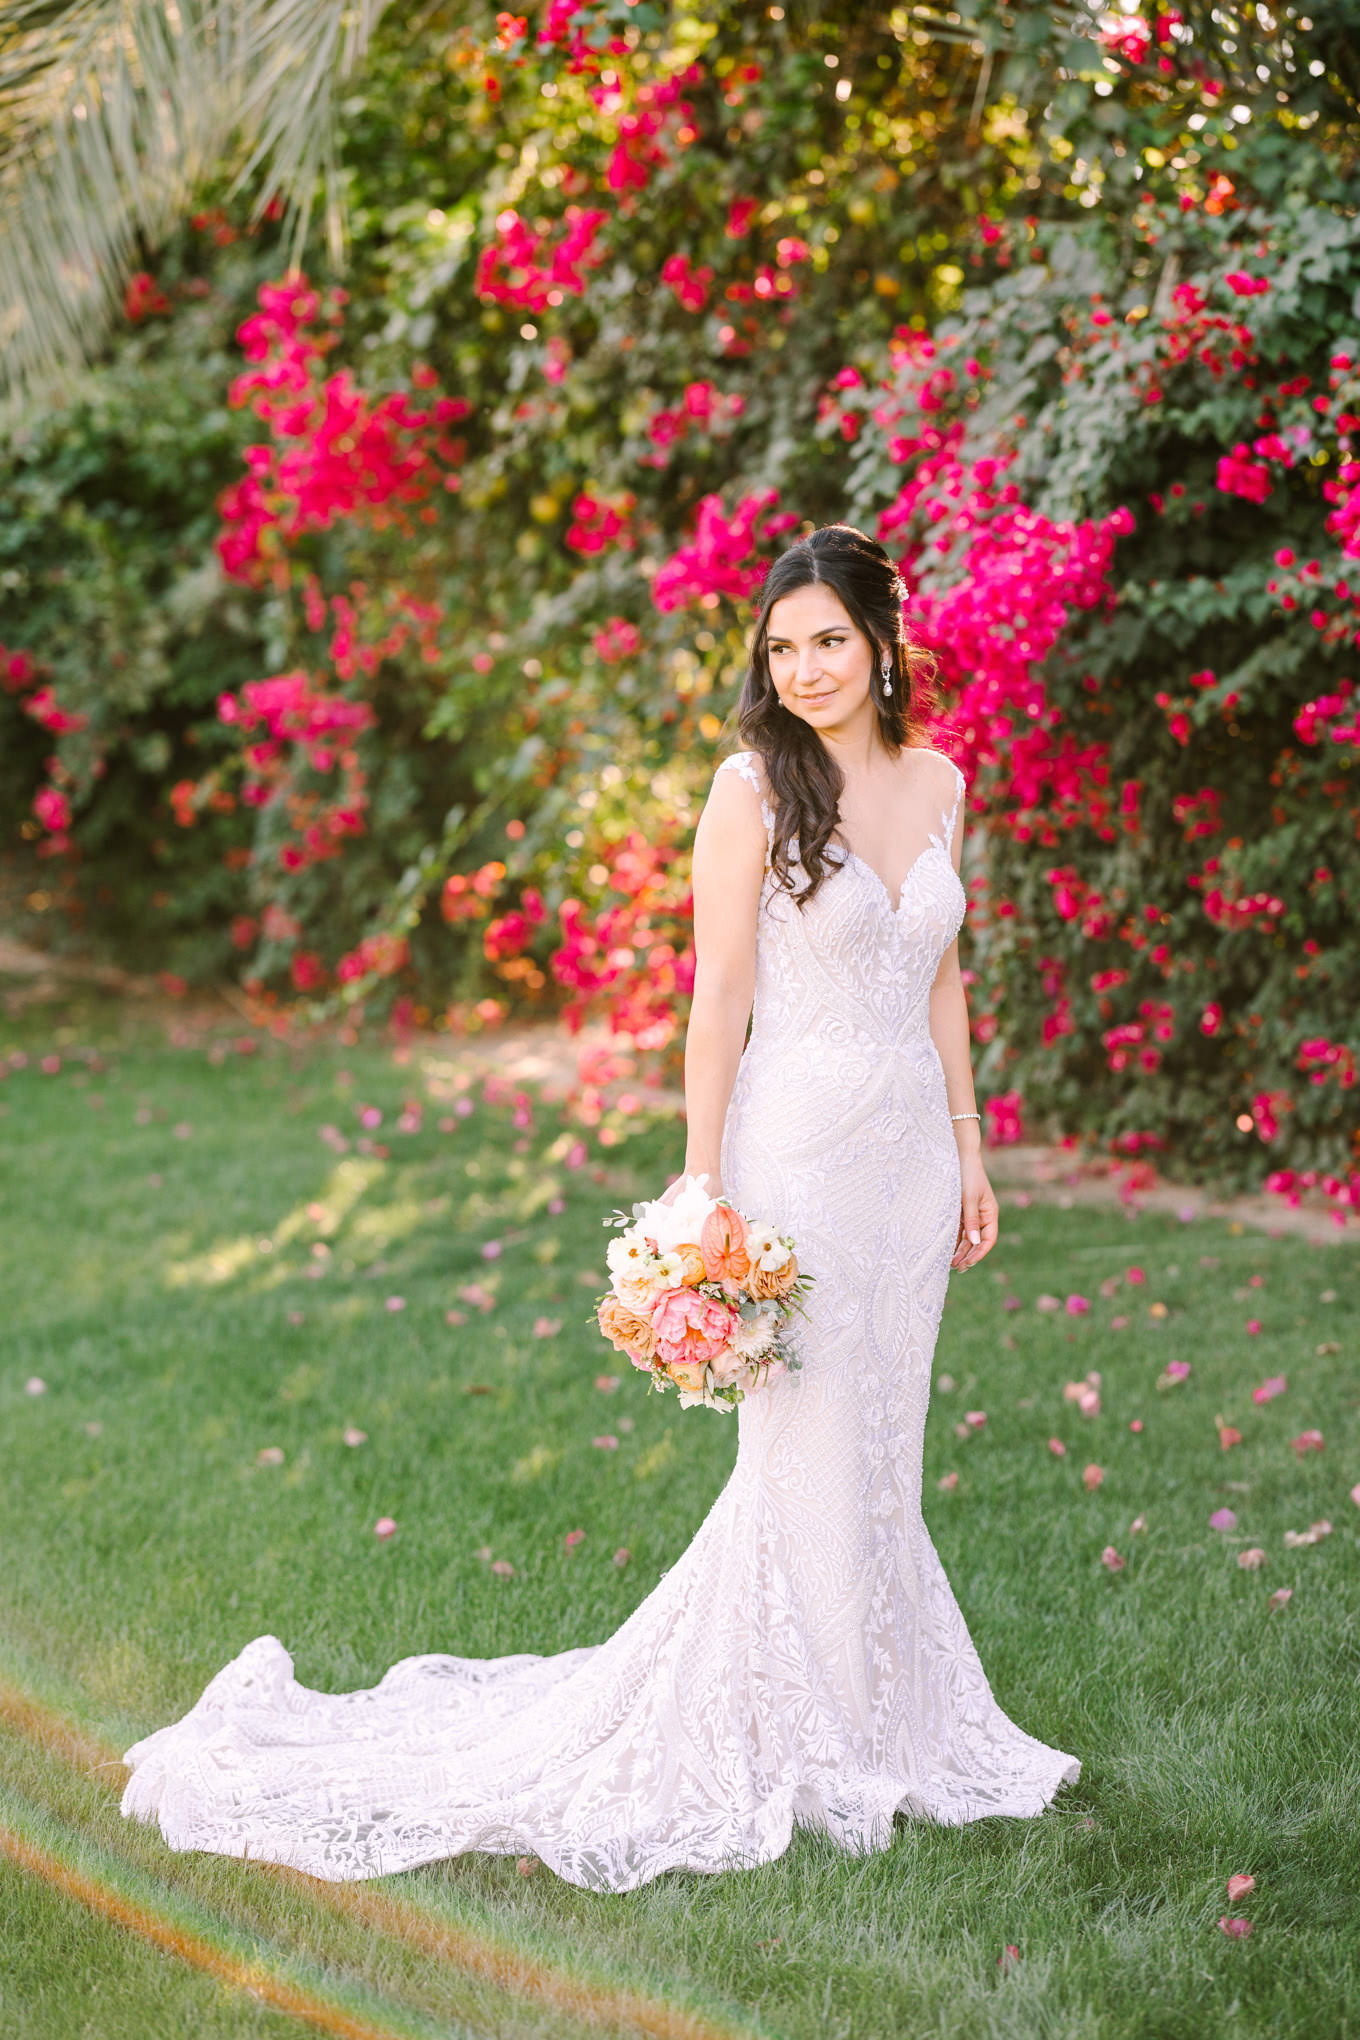 Bride with bouquet | Pink Bougainvillea Estate wedding | Colorful LA wedding photography | #bougainvilleaestate #palmspringswedding #palmspringsweddingvenue #palmspringsphotographer Source: Mary Costa Photography | Los Angeles